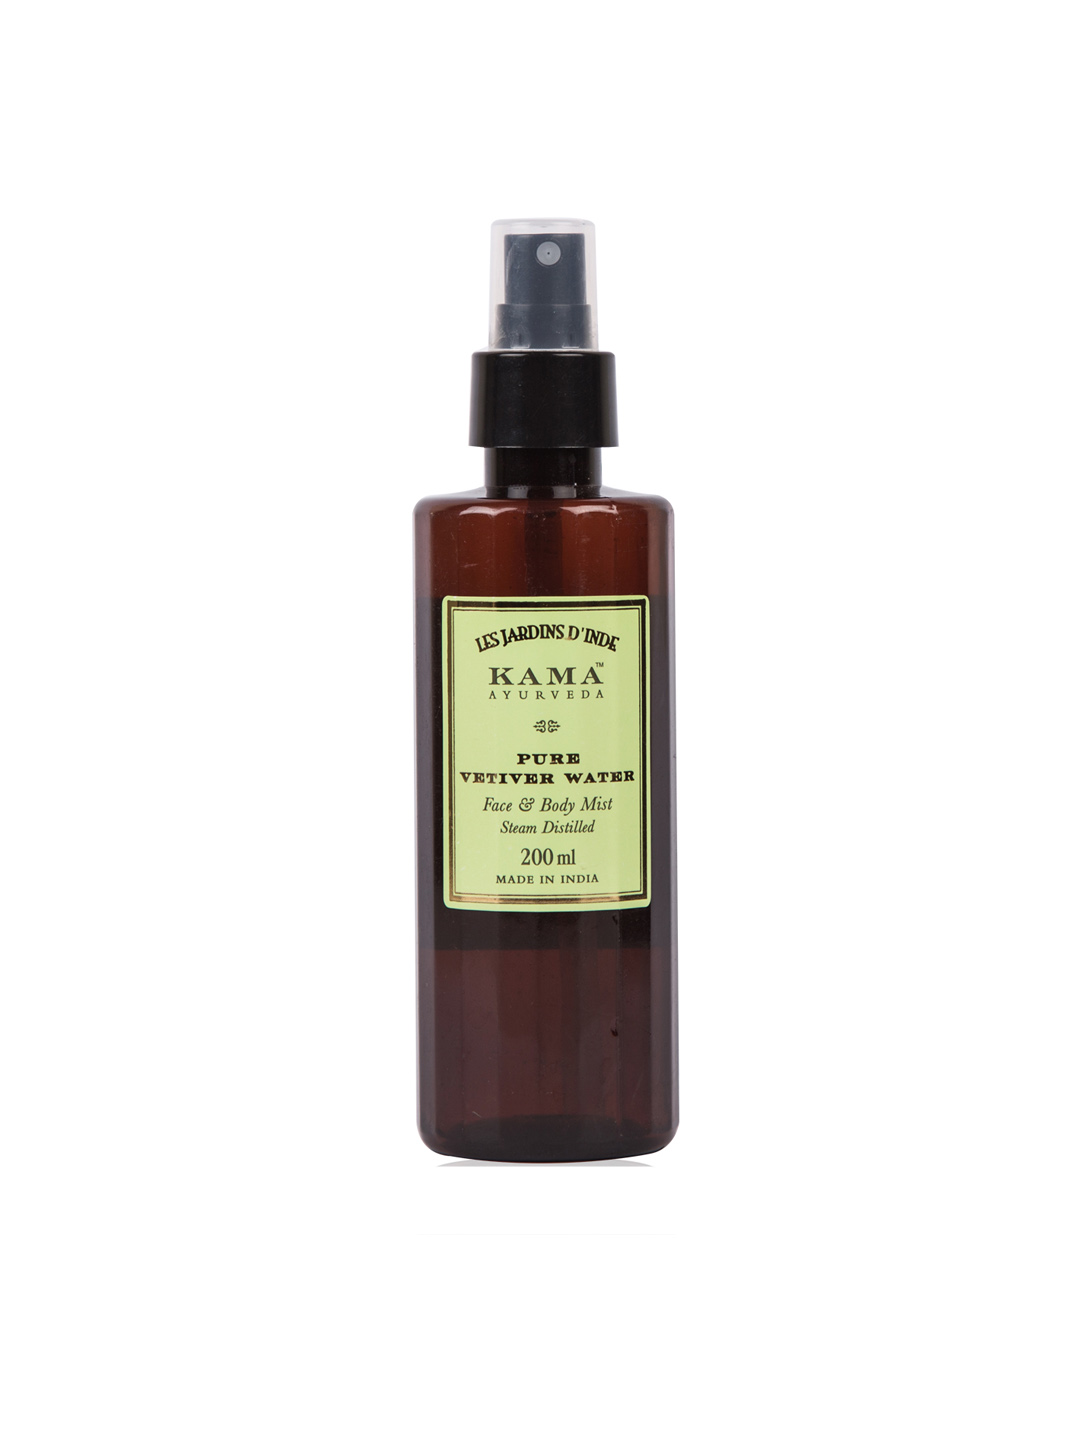 KAMA AYURVEDA Unisex Pure Vertiver Steam Distilled Face and Body Mist 200 ml Price in India